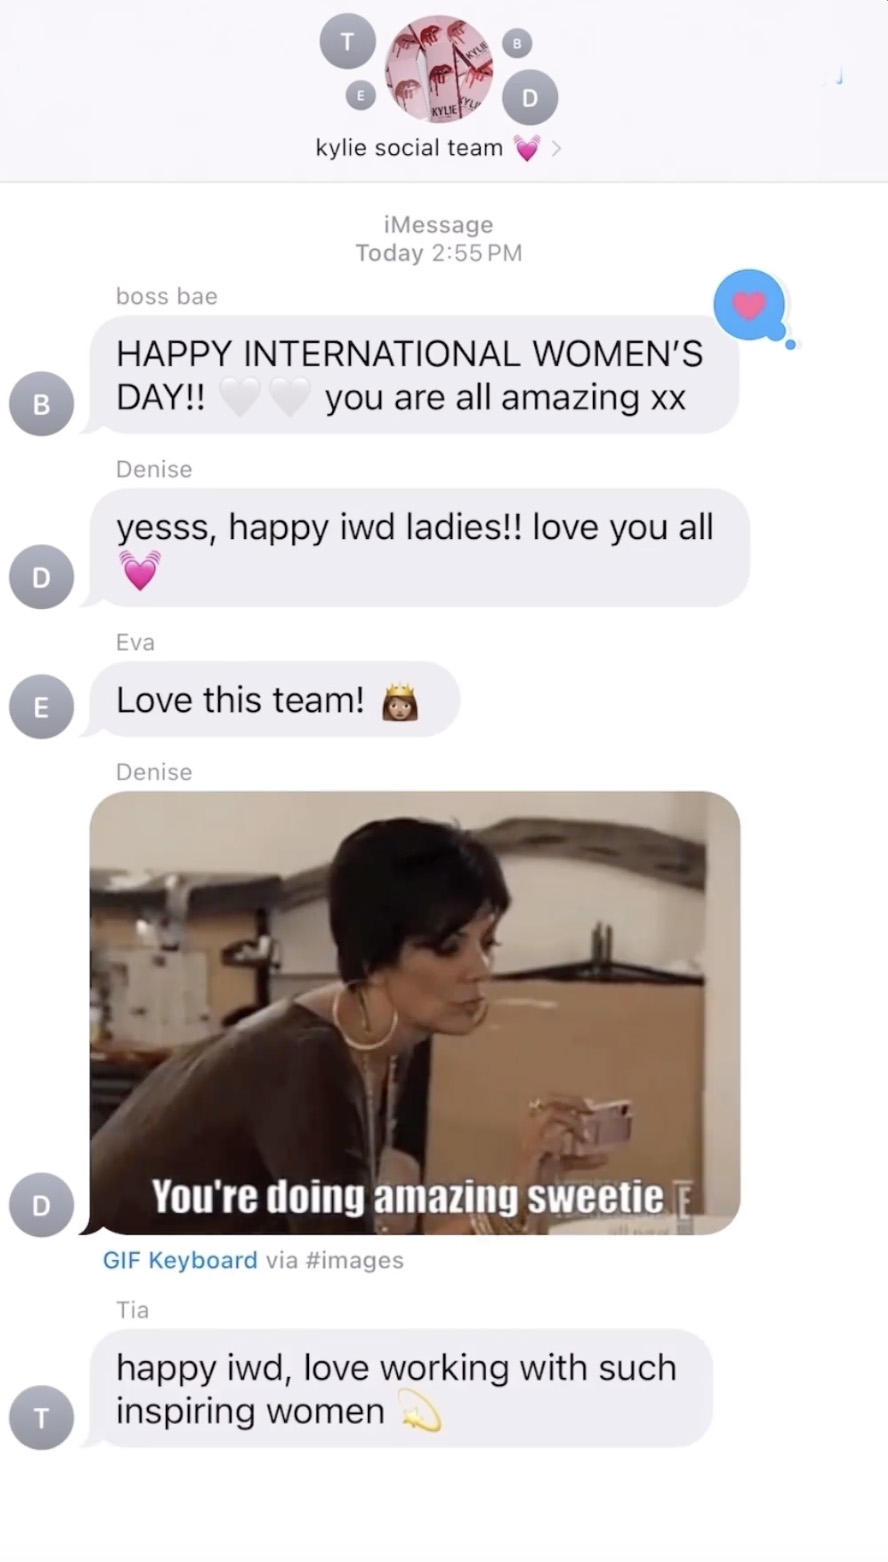 In an Instagram post, Kylie and her social media team celebrated International Women's Day